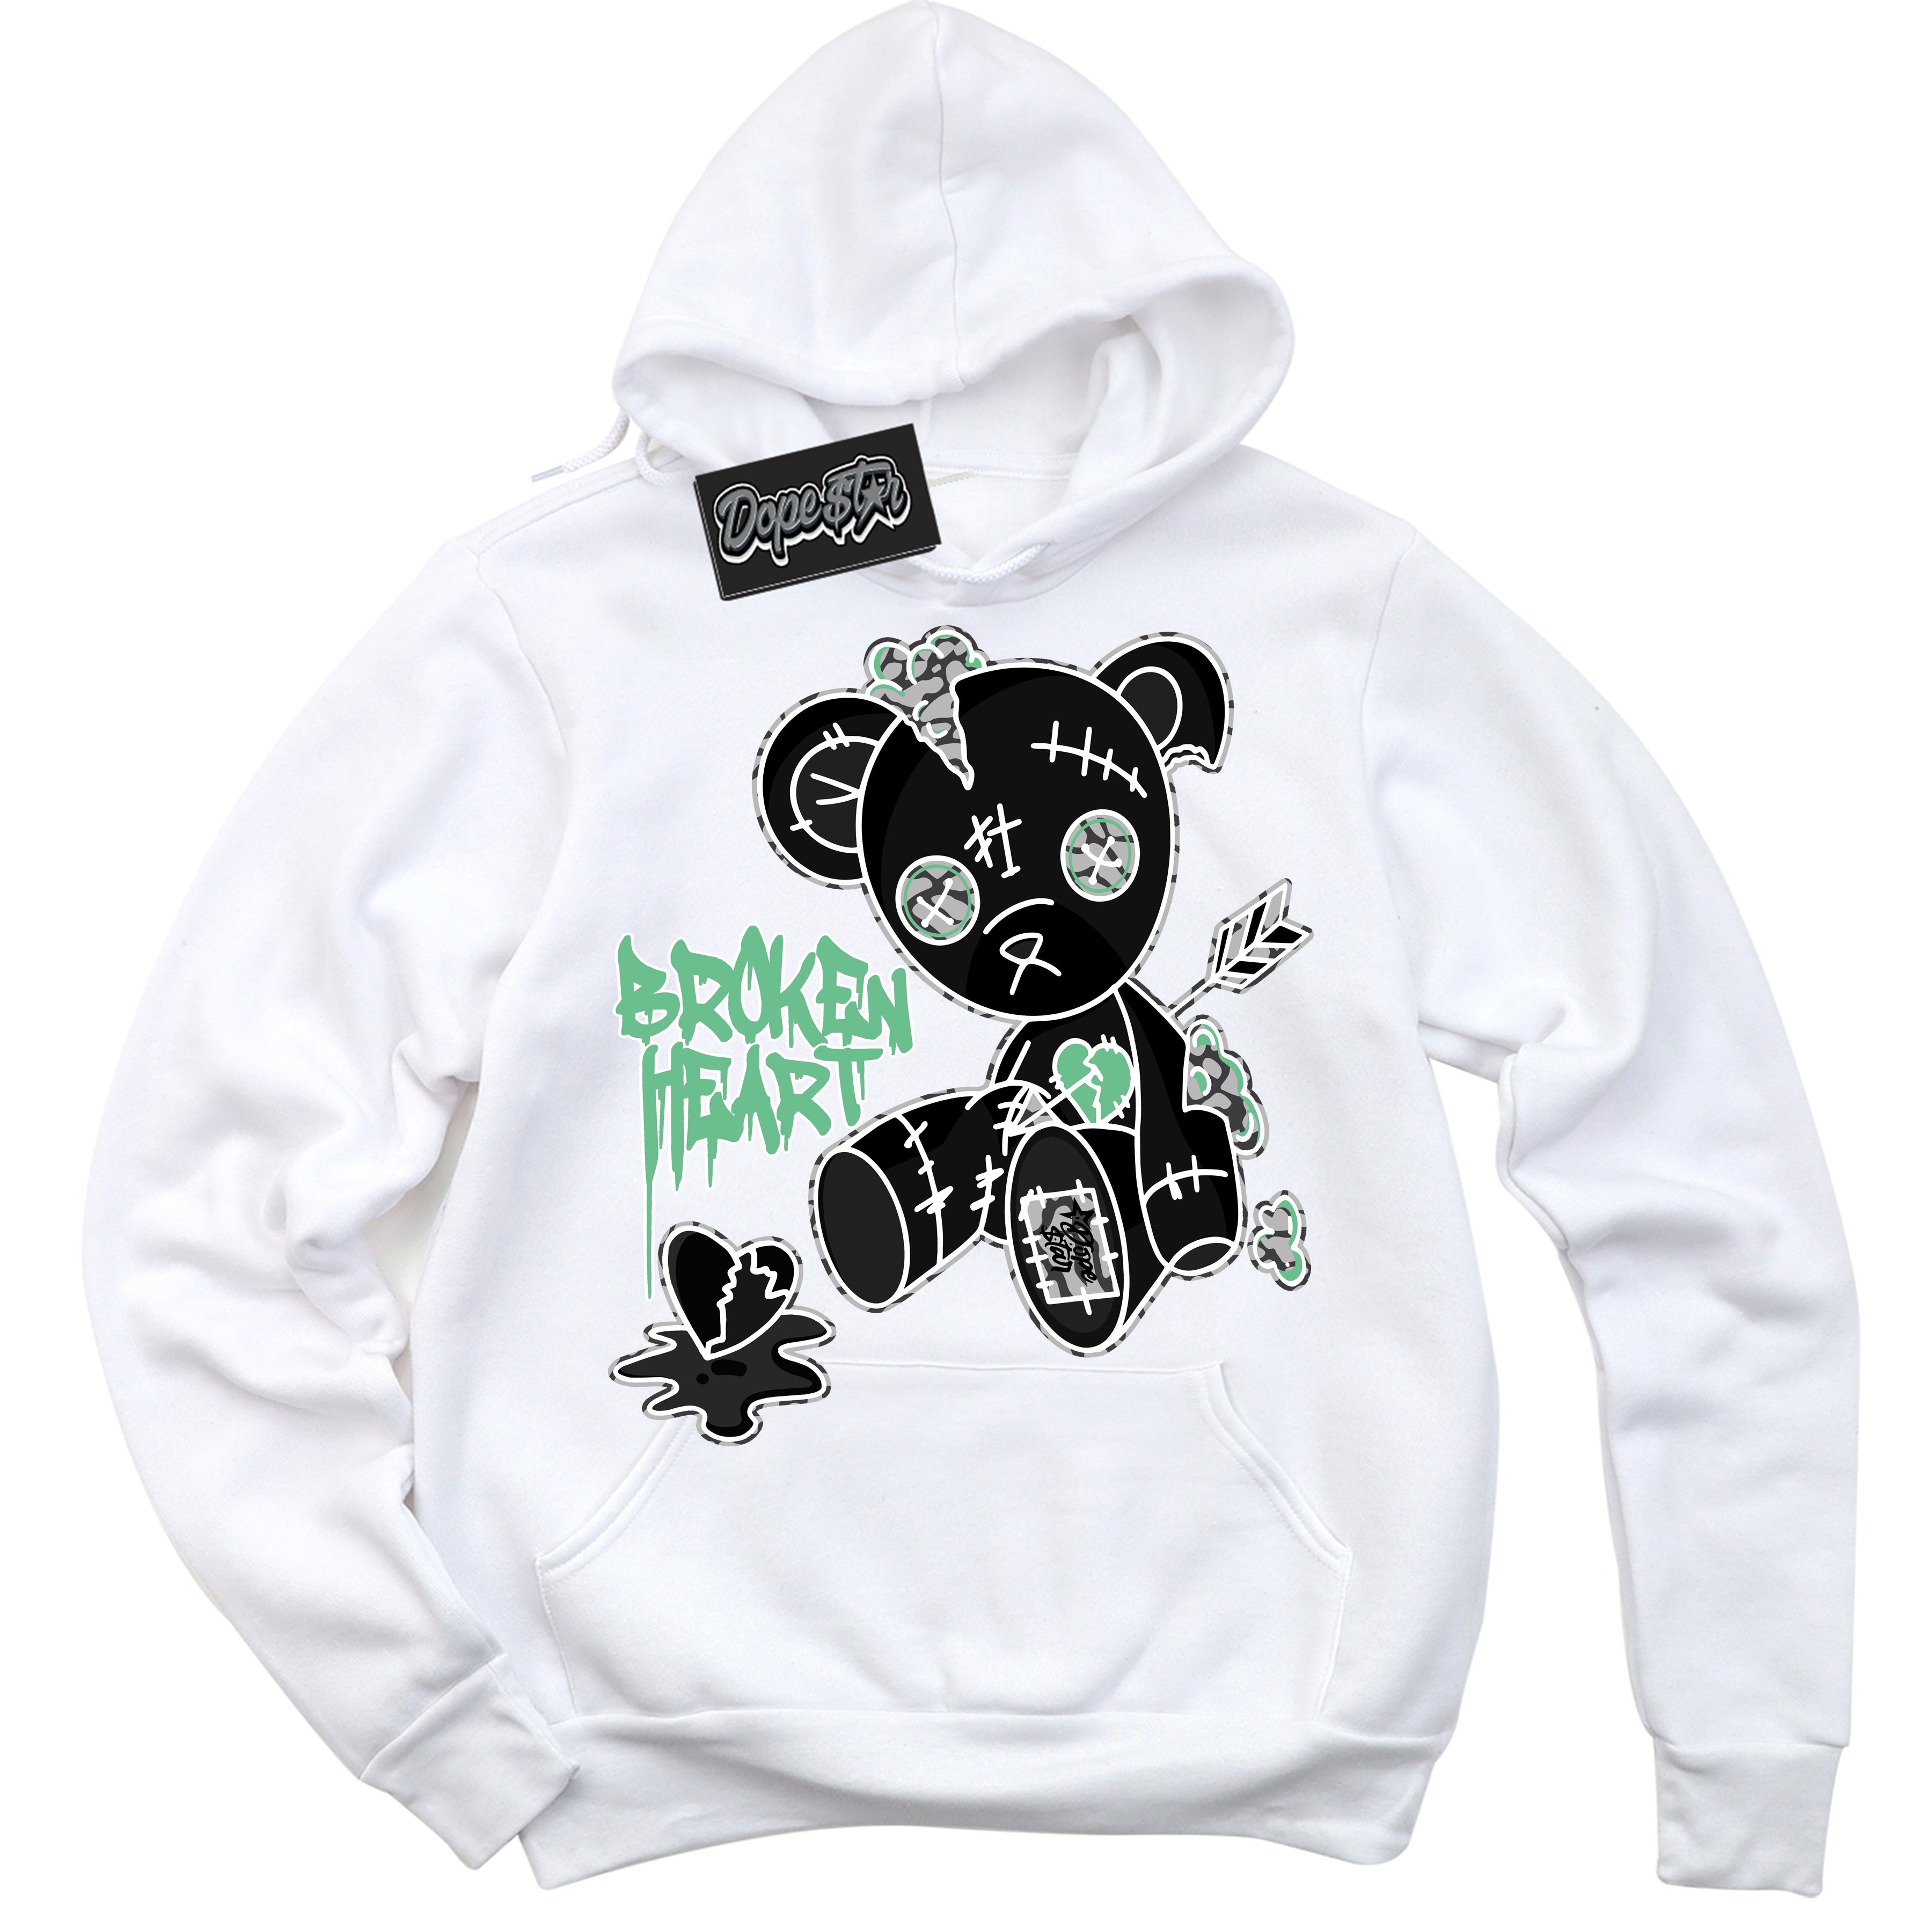 Cool White Graphic DopeStar Hoodie with “ Broken Heart Bear “ print, that perfectly matches Green Glow 3s sneakers